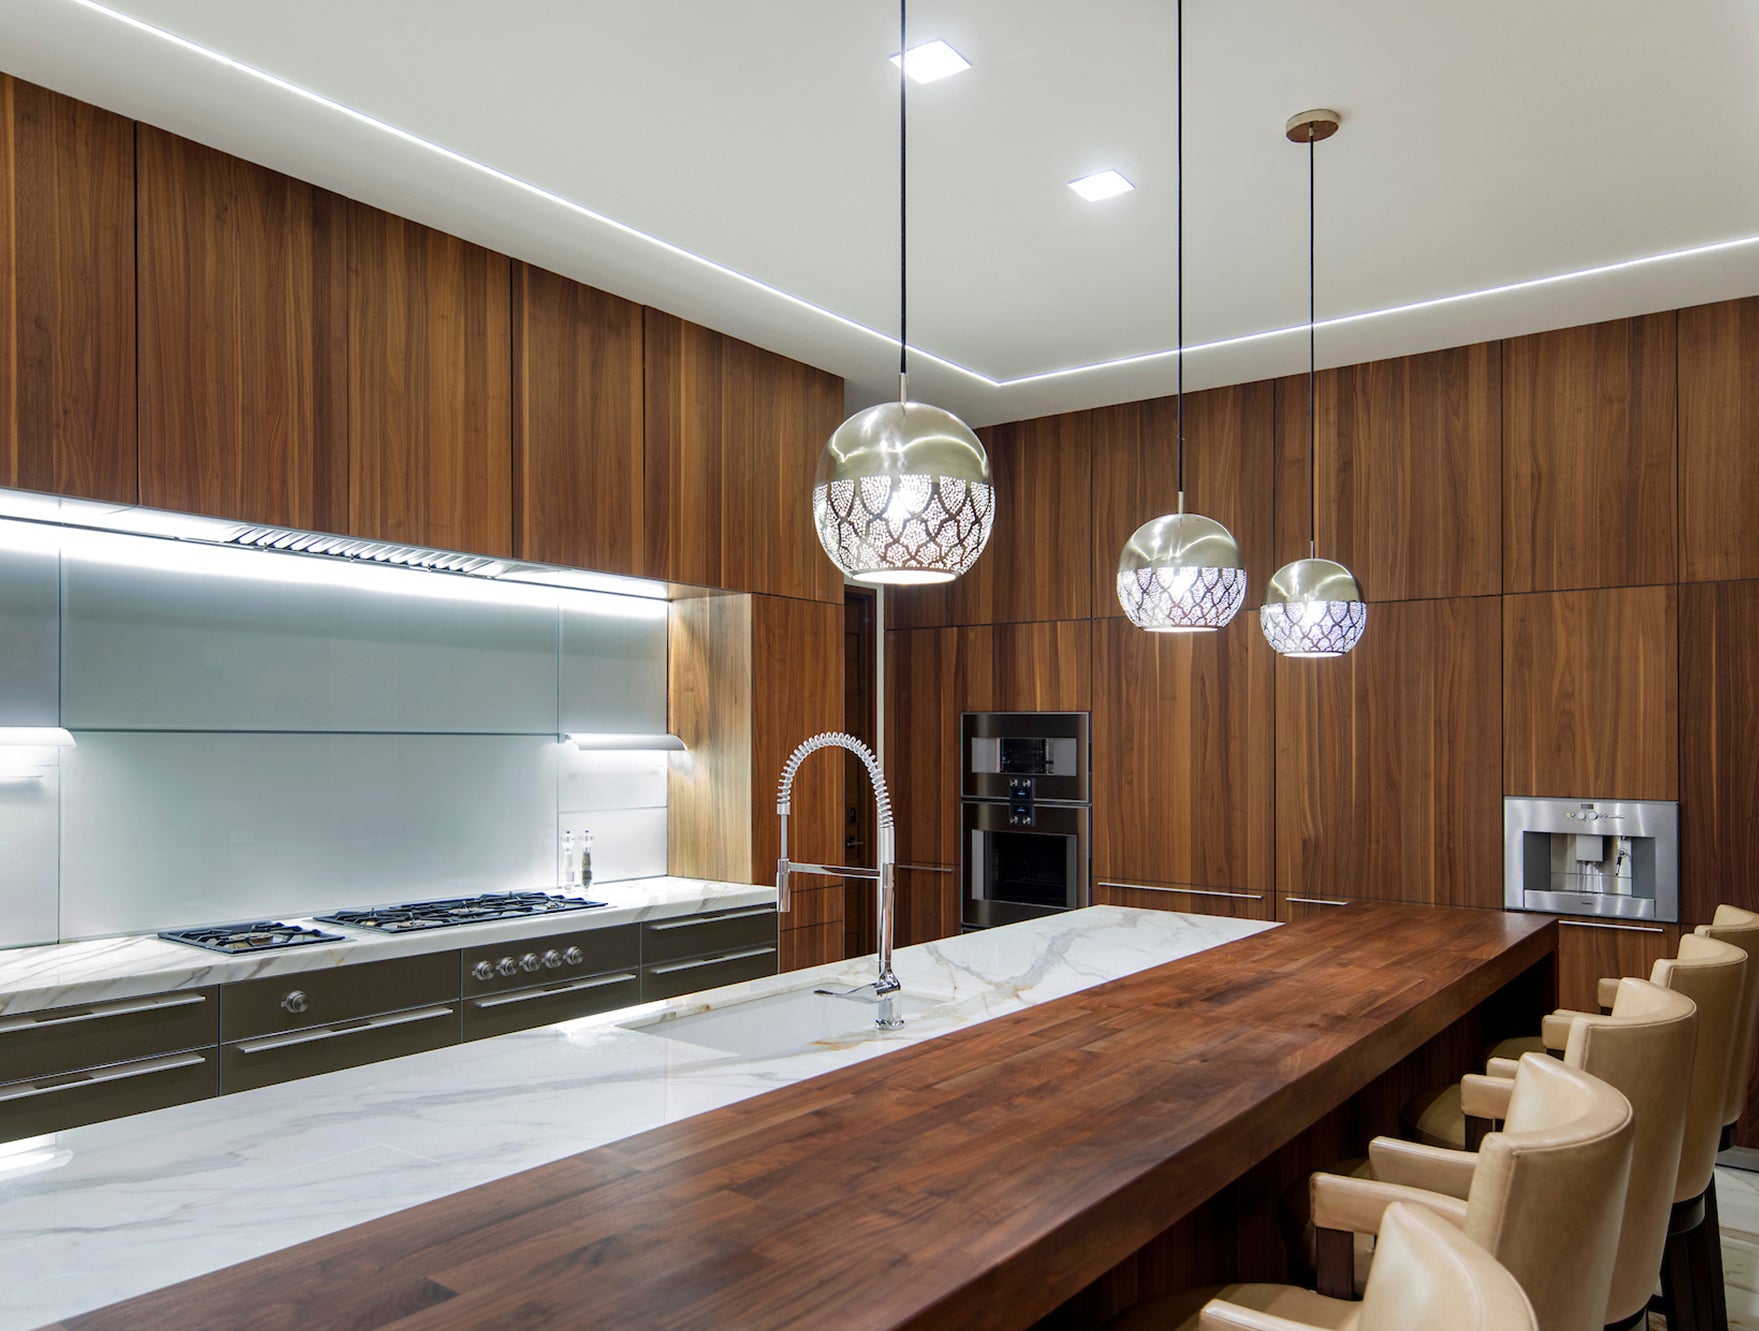 4 Simple Ways To Take Your Kitchen Lighting to the Next Level